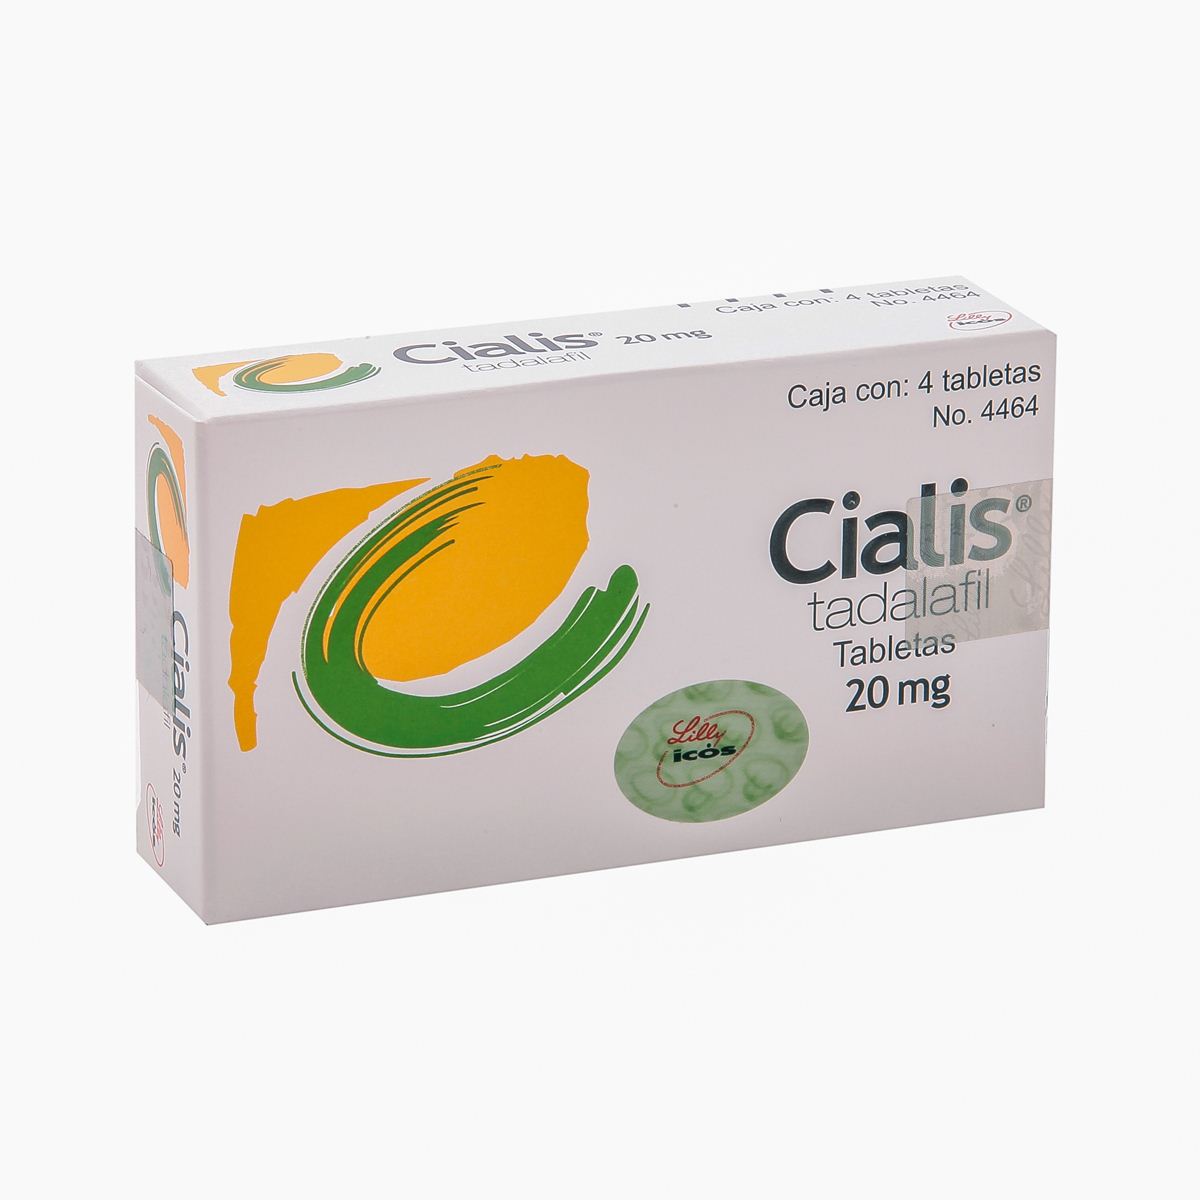 Cialis t 4 20mg